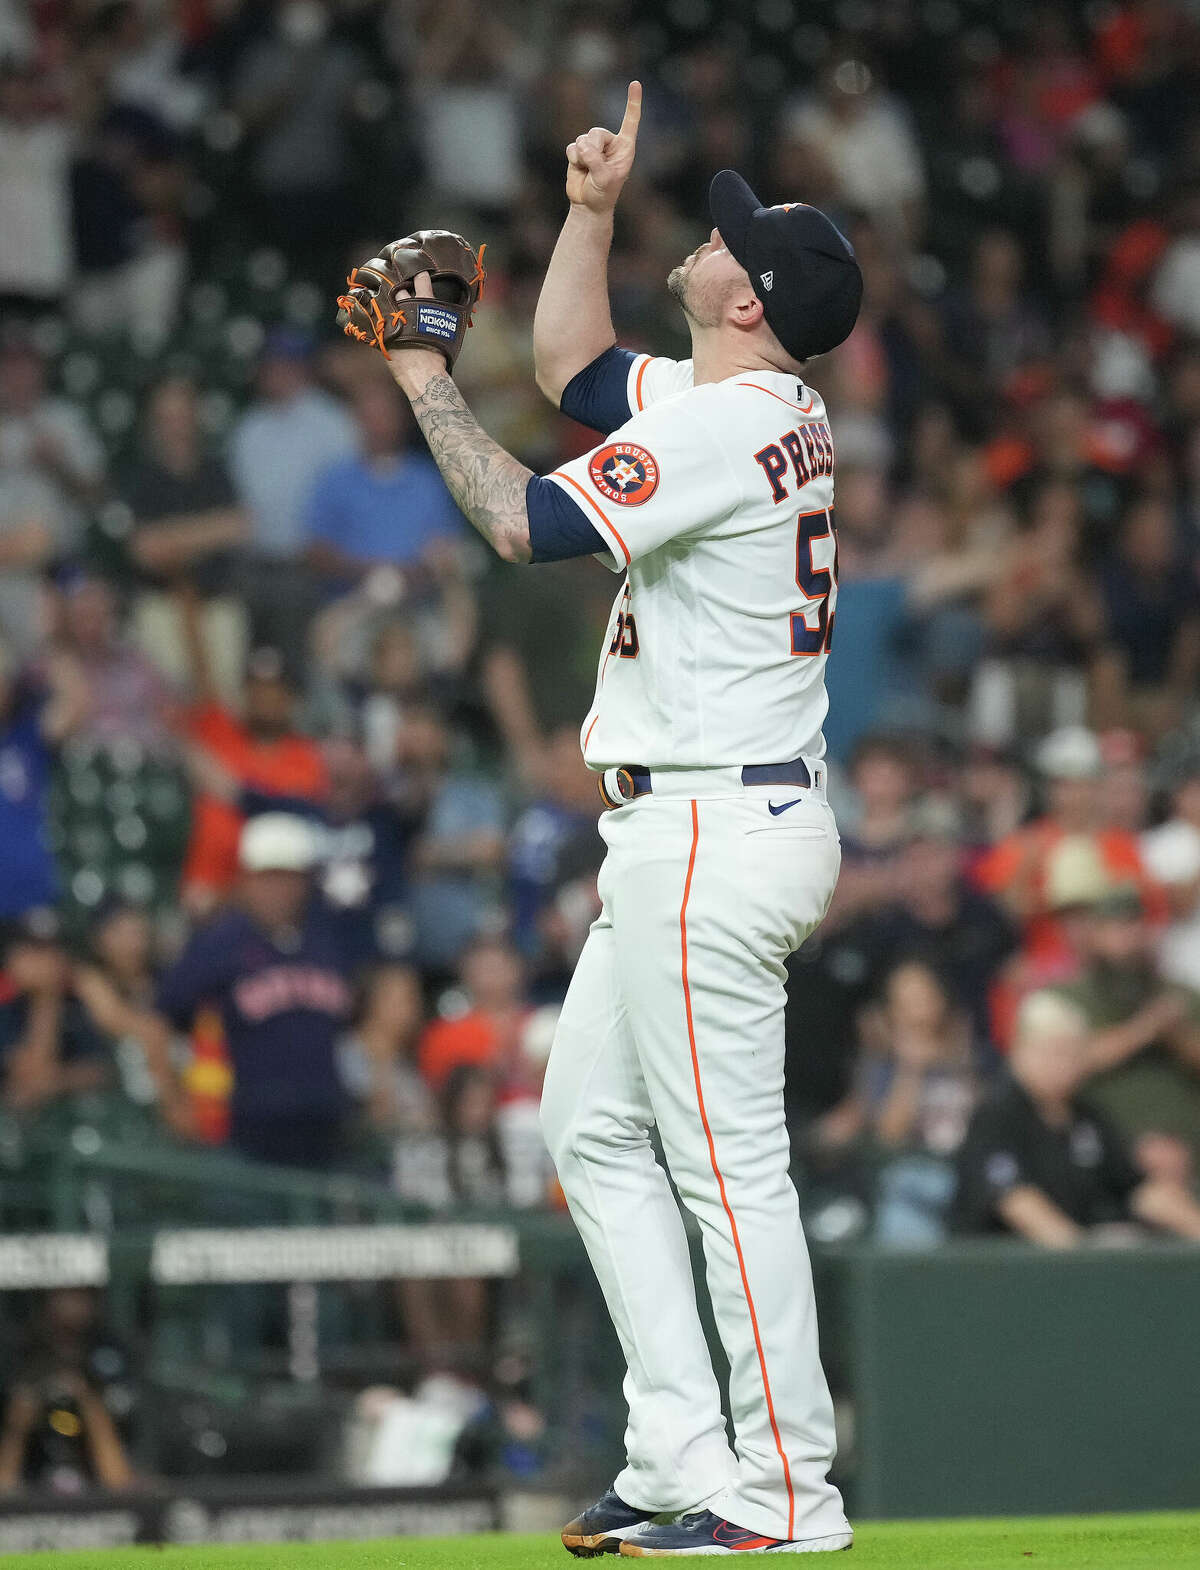 Houston Astros relief pitcher Ryan Pressly (55) reacts after striking out Texas Rangers Brad Miller (13) to end an MLB game at Minute Maid Park on Thursday, May 19, 2022 in Houston. Astros won 5-1.